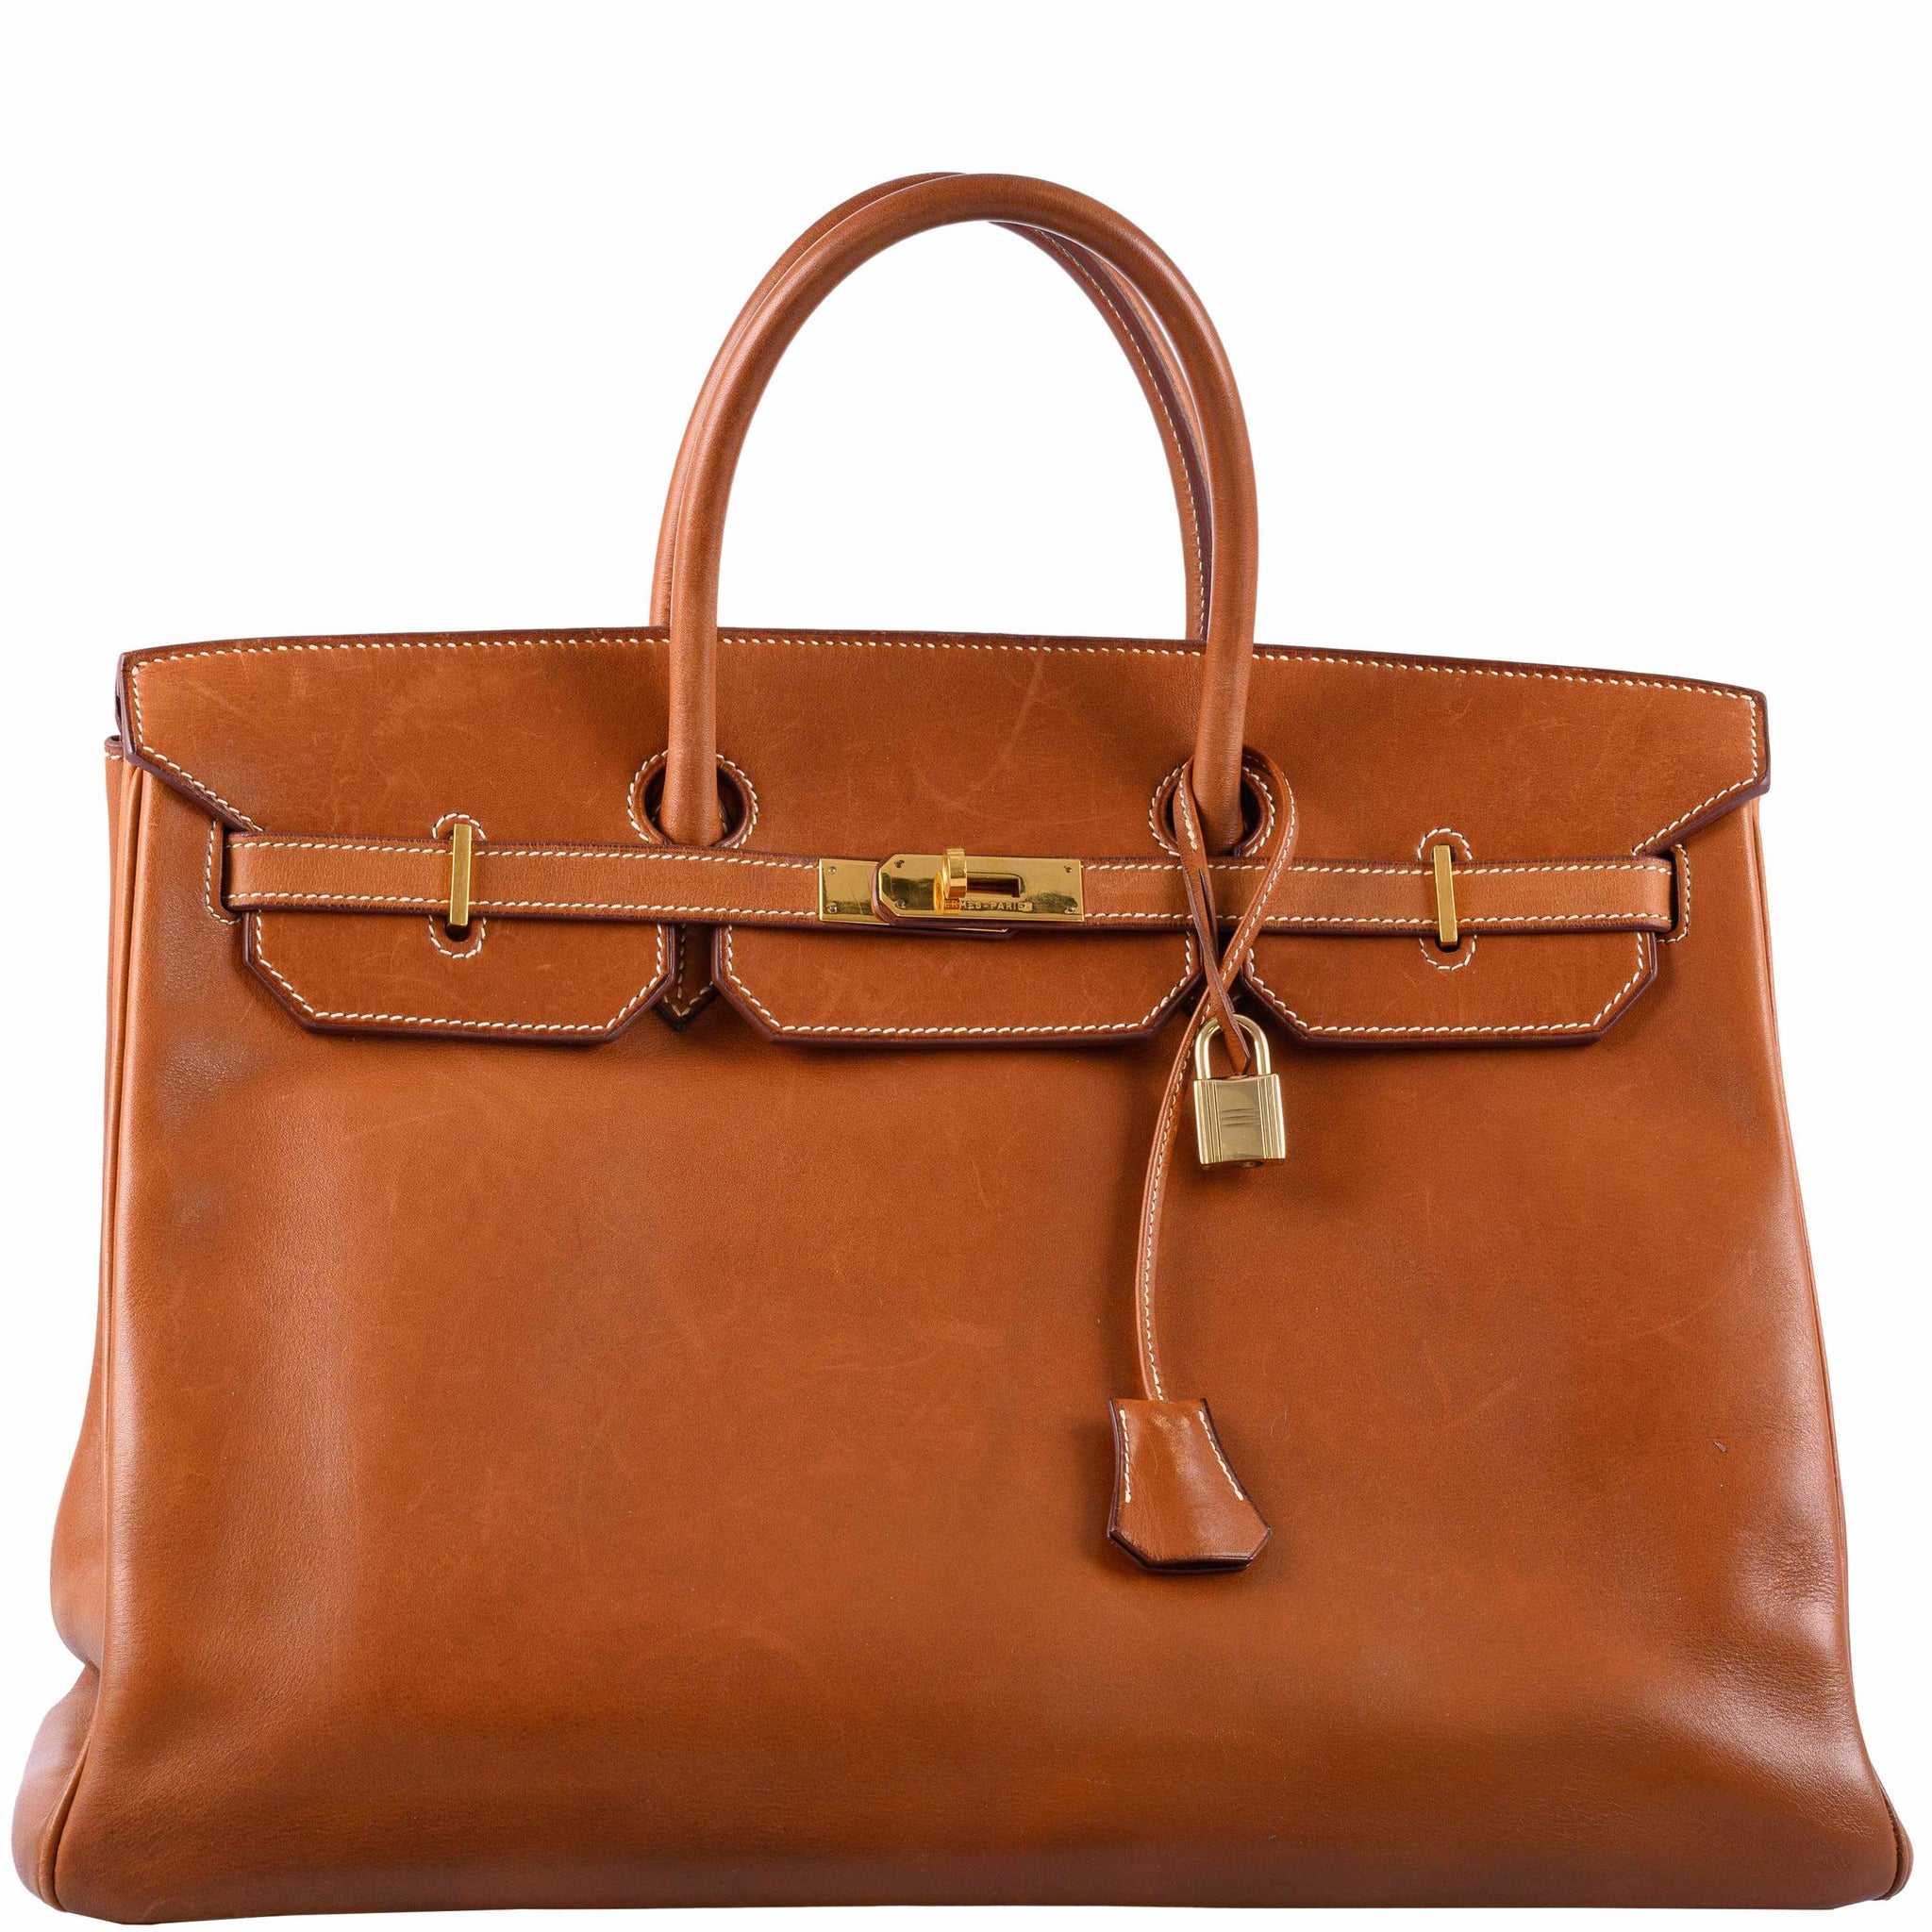 Rare Authentic Hermes Birkin Hac 32 Ostrich Leather Tan Gold